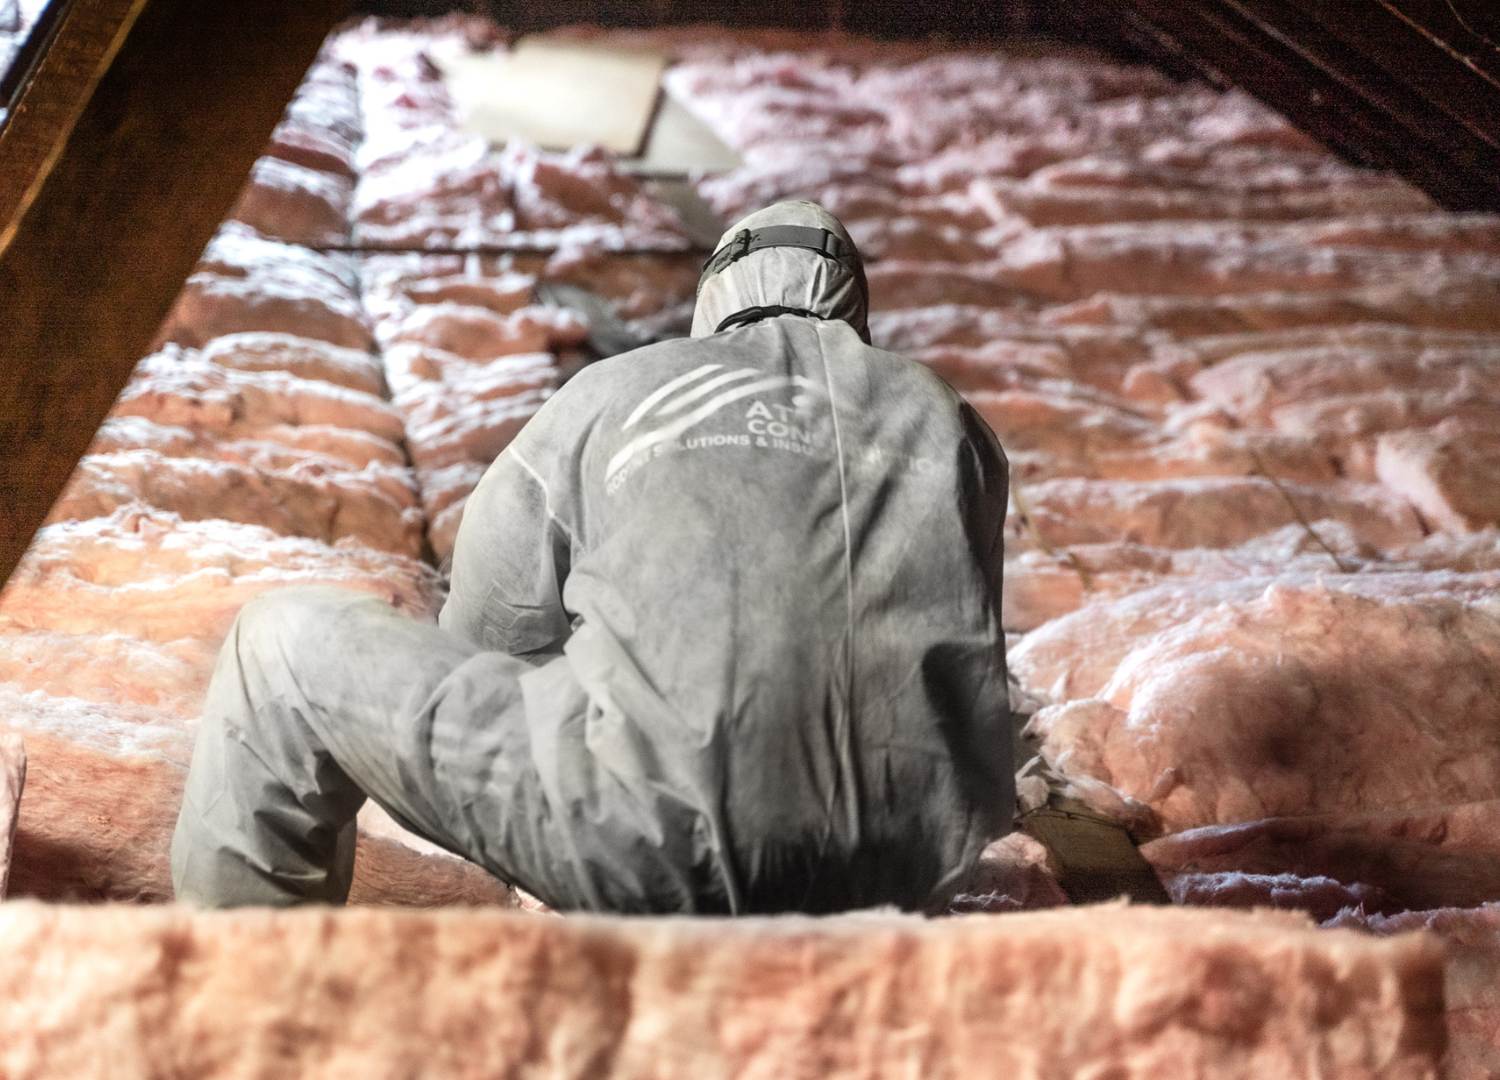 man in a white hazard suit installing new insulation in an attic.